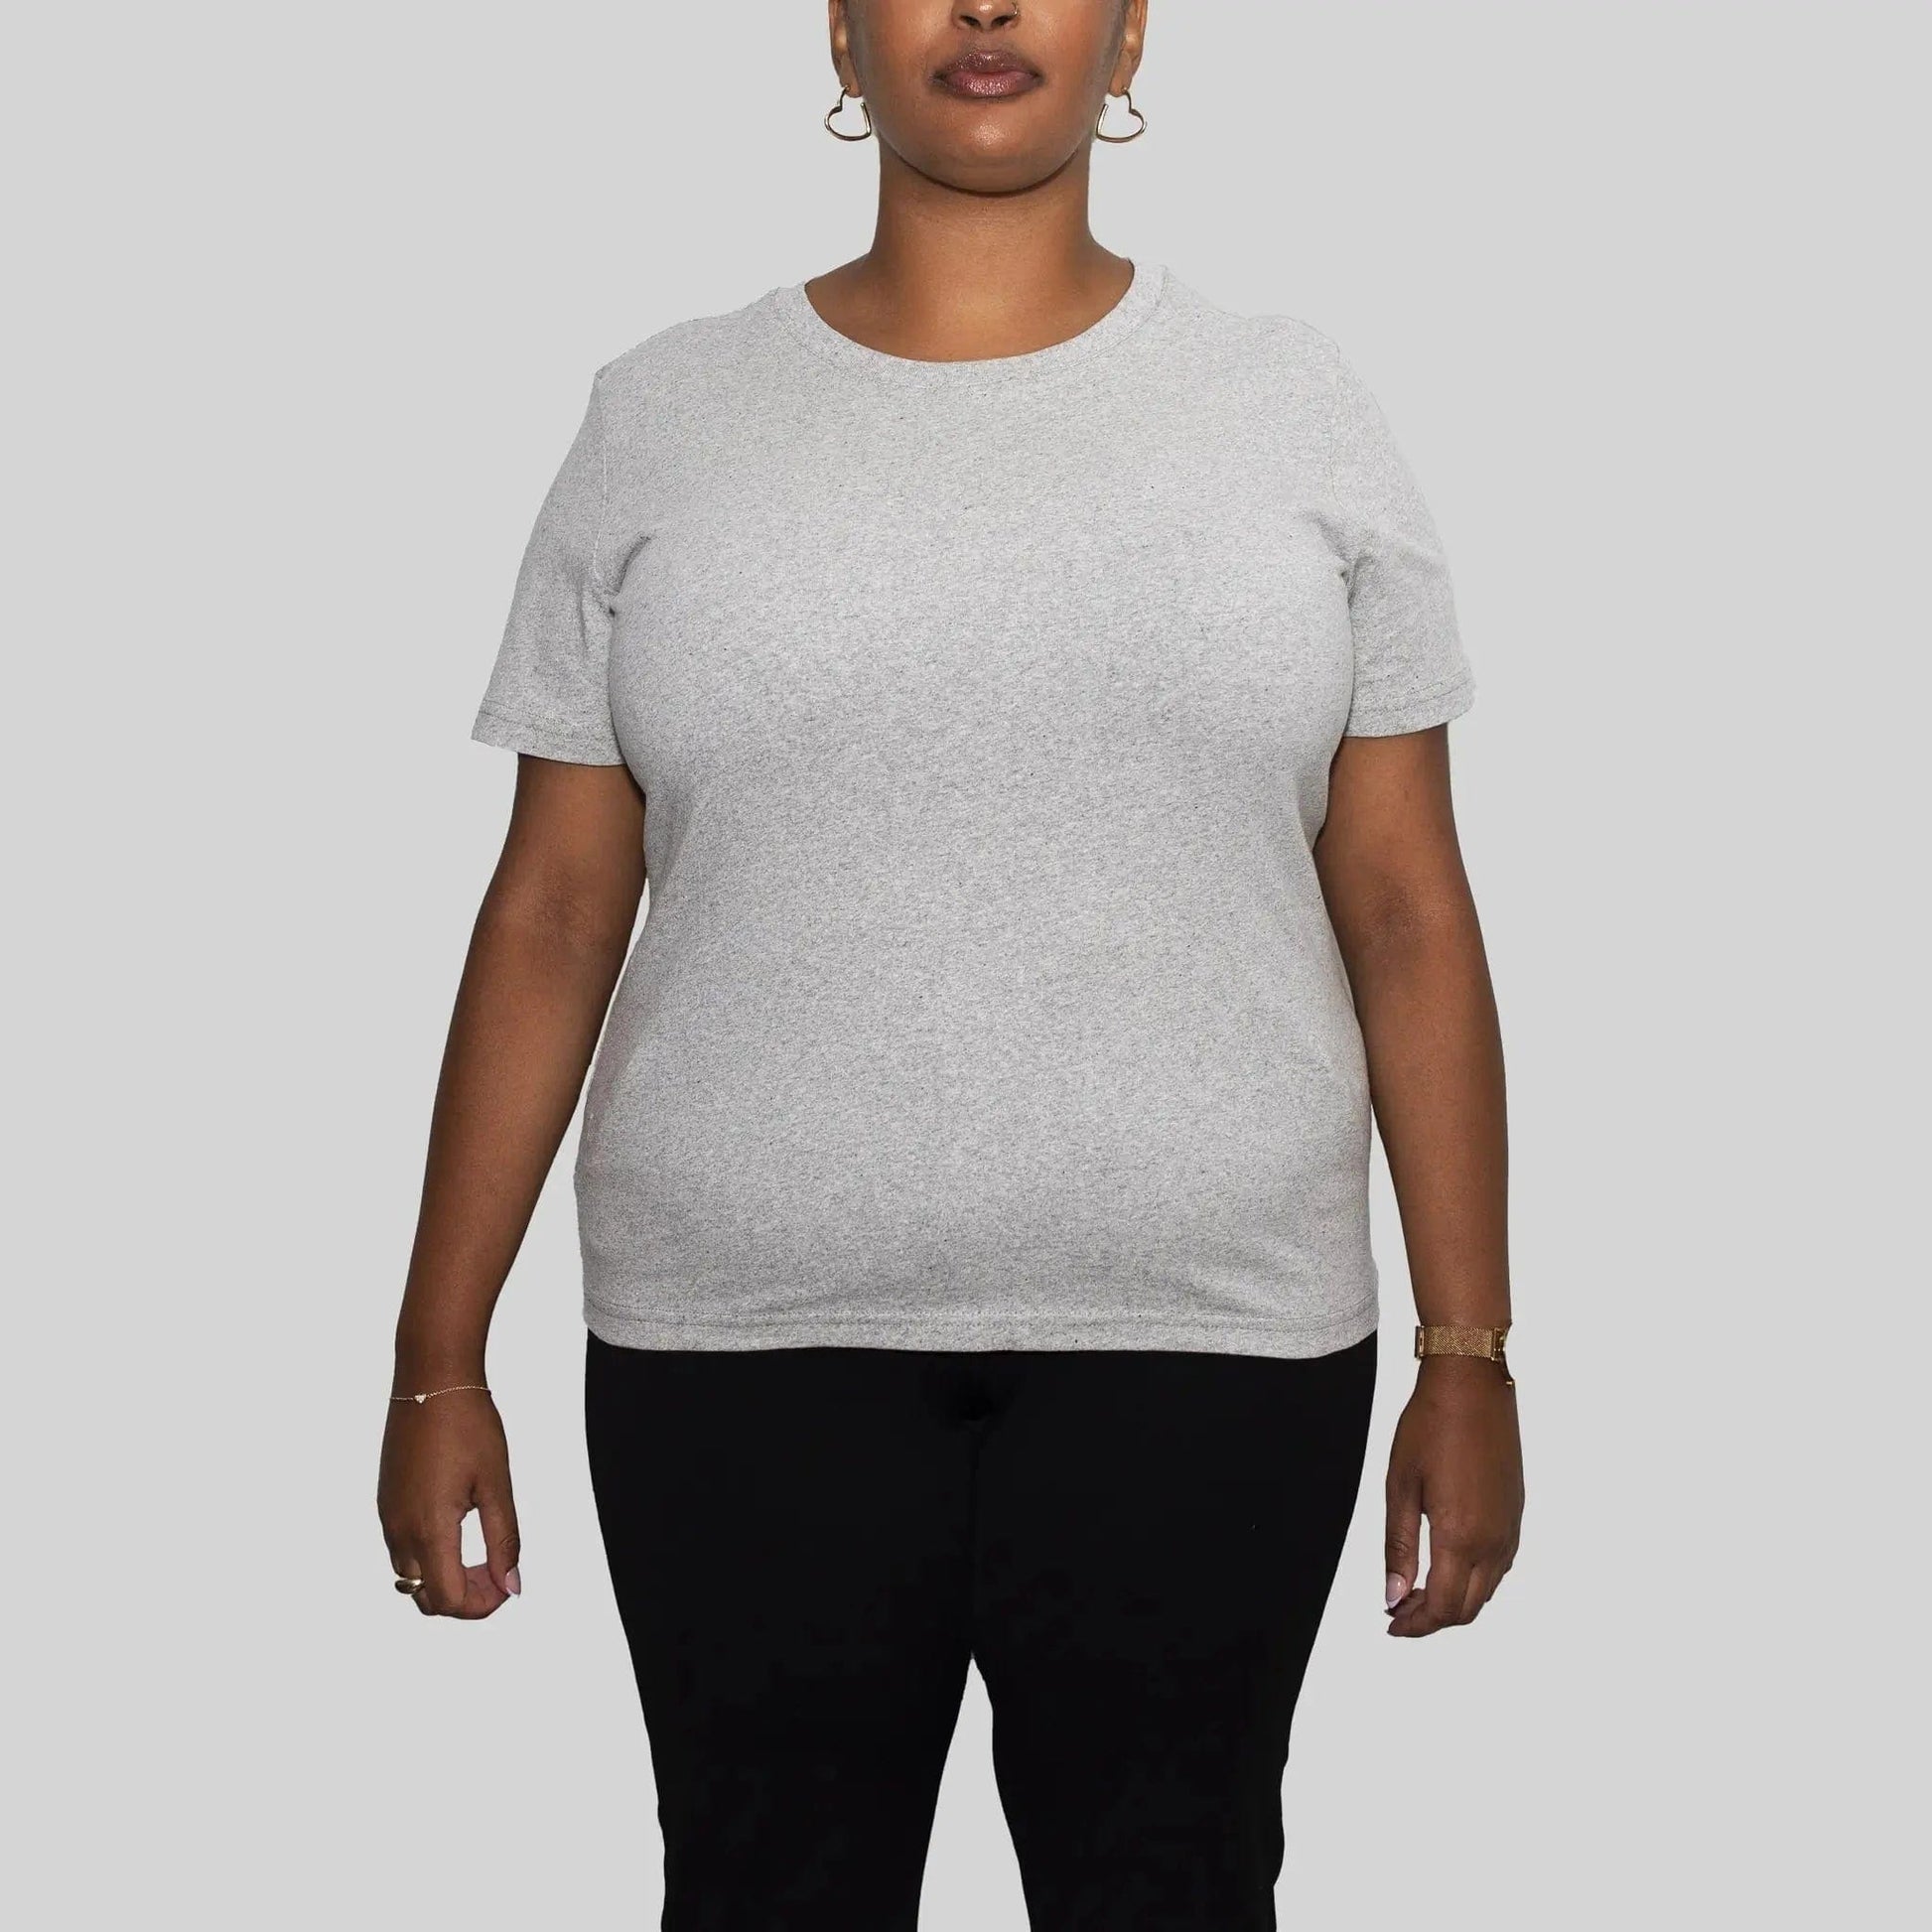 5 Pack | Women’s T-Shirts, Recycled Cotton, Heather Grey